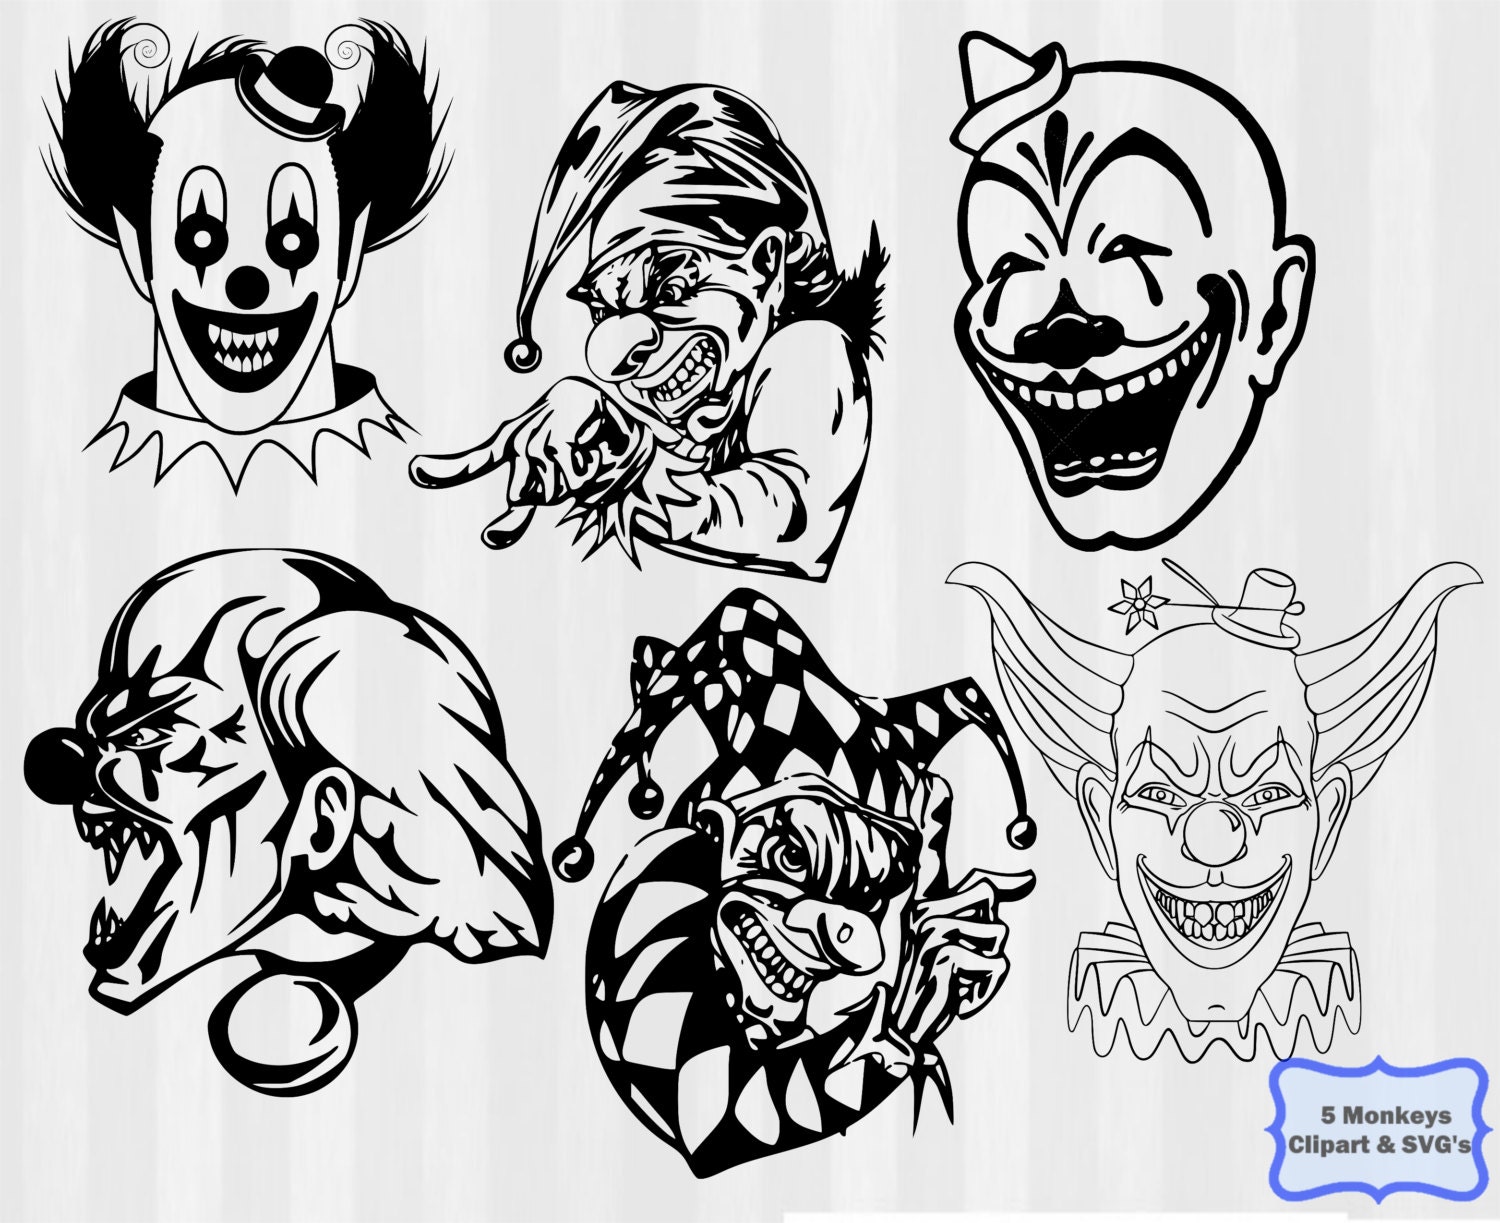 Download Scary Clown SVG clown Clipart .svg .dxf .png by 5StarClipart